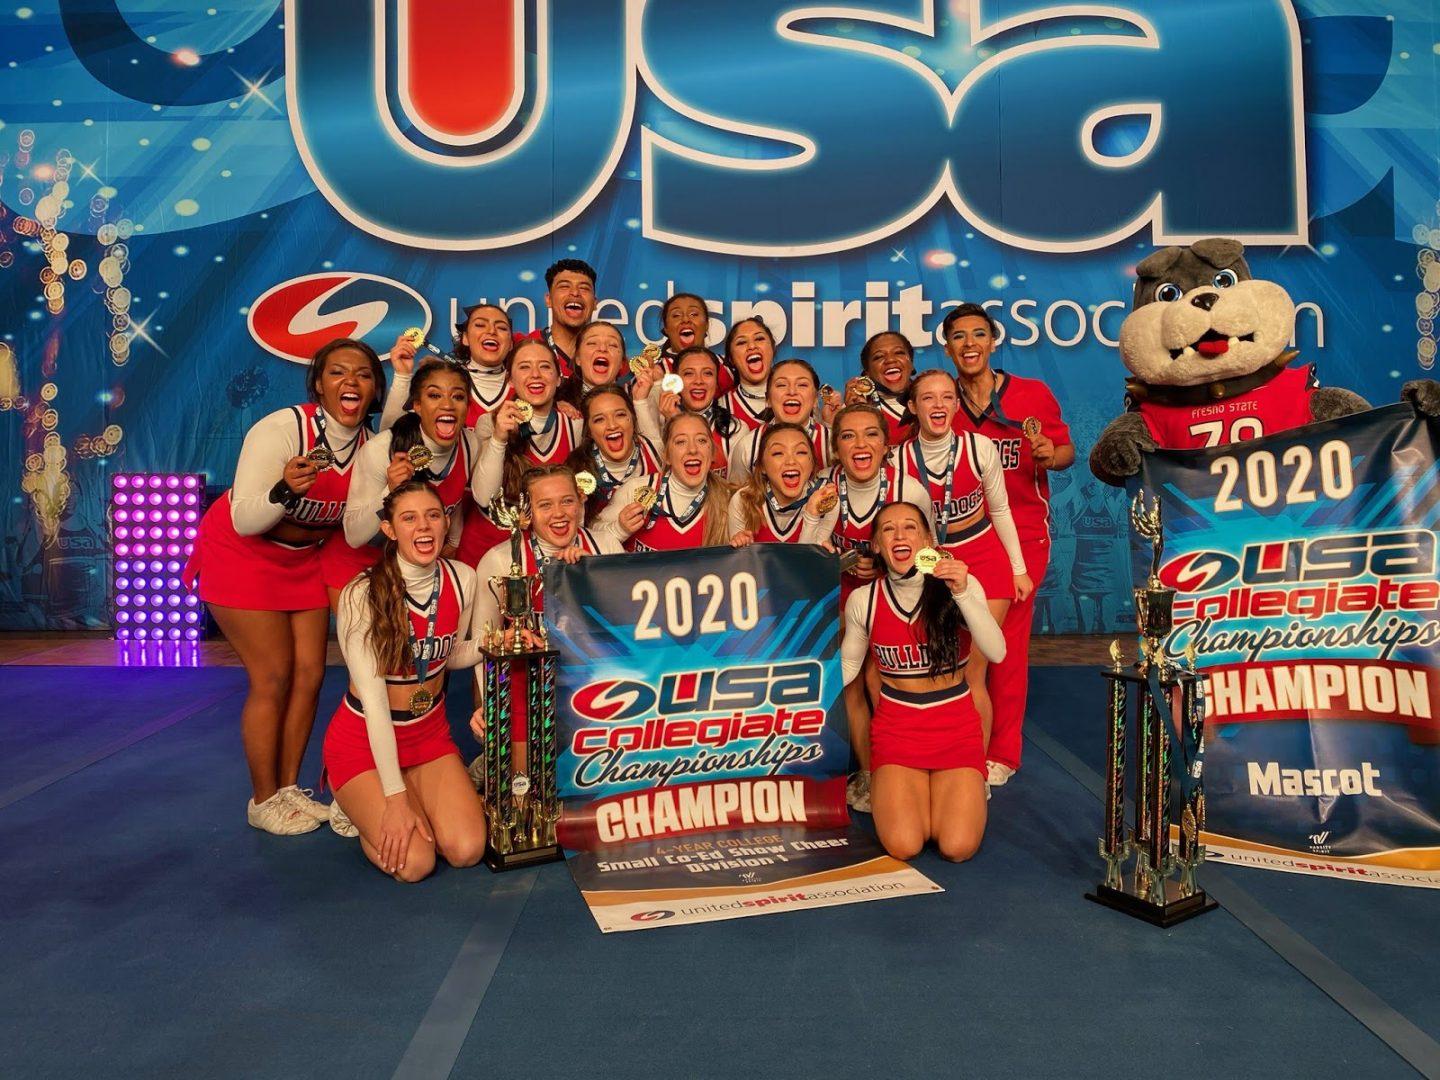 The Fresno State cheer team (left) and mascot, TimeOut, (right) celebrate their first place trophies and medals at the USA Collegiate Championships. Fresno State finished with a score of 89.51 in Division I small co-ed show cheer among 4-year colleges. (Courtesy Fresno State Spirit)